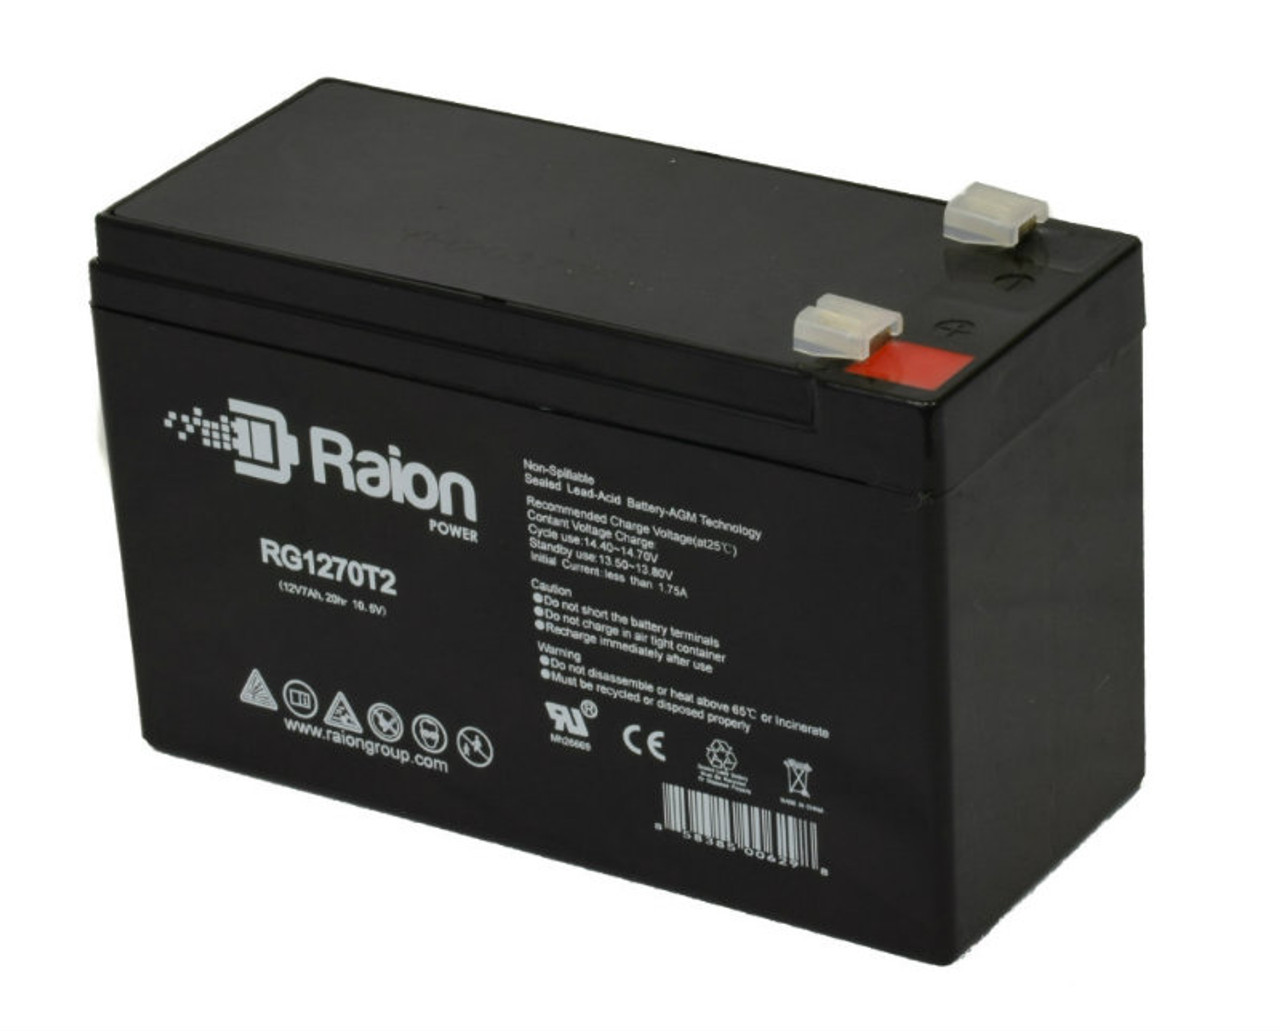 Raion Power Replacement 12V 7Ah Battery for Expocell P212/70 - 1 Pack